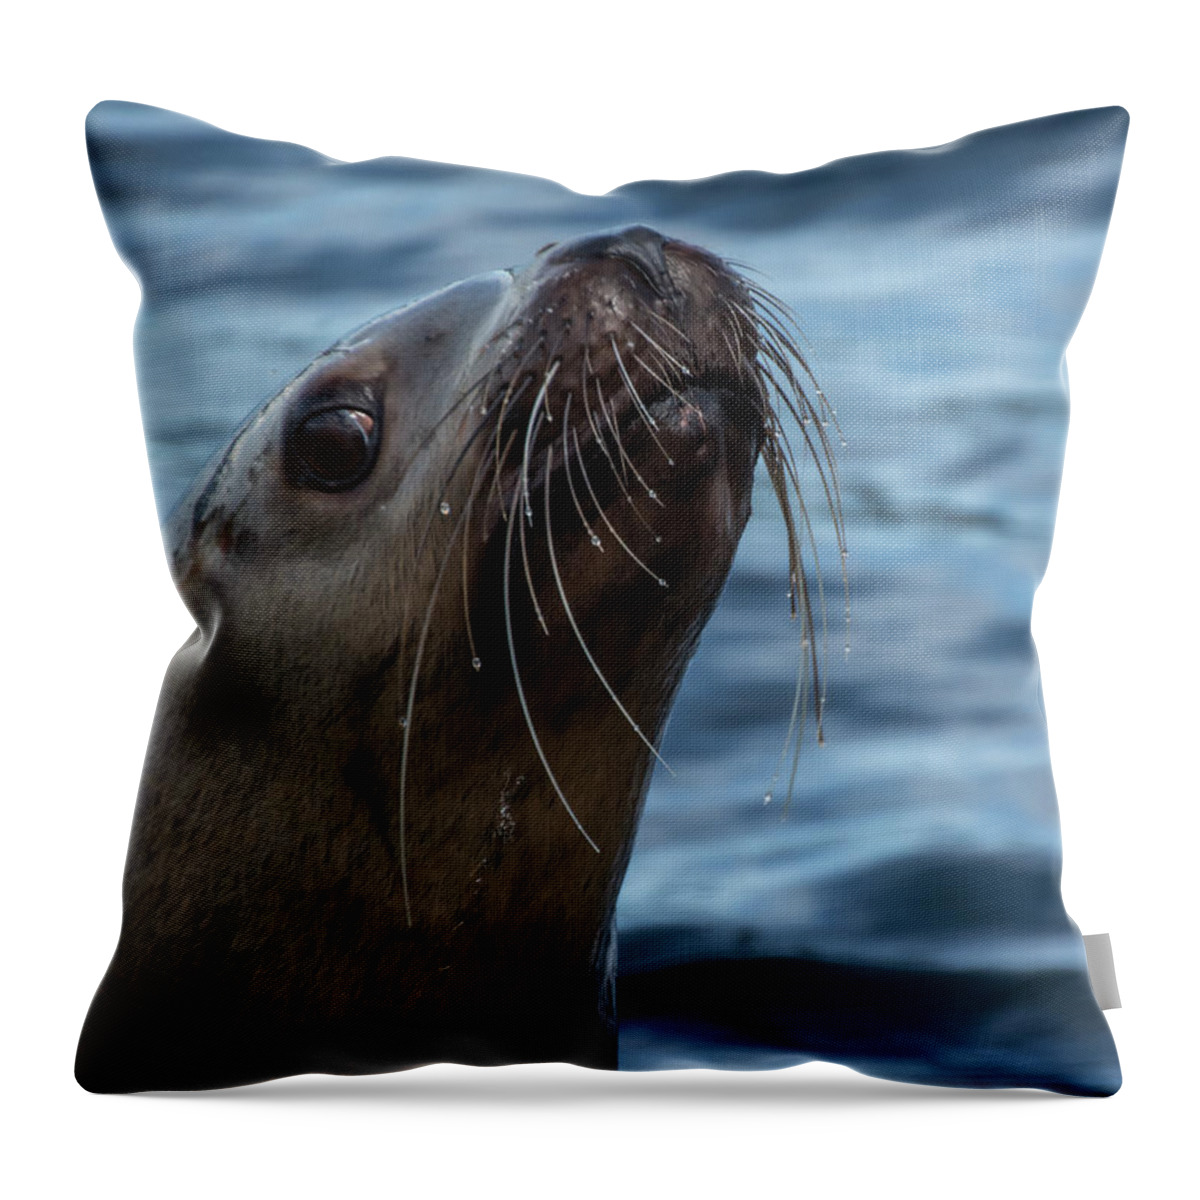 Sea Lion Throw Pillow featuring the photograph Curious Lion by David Kirby